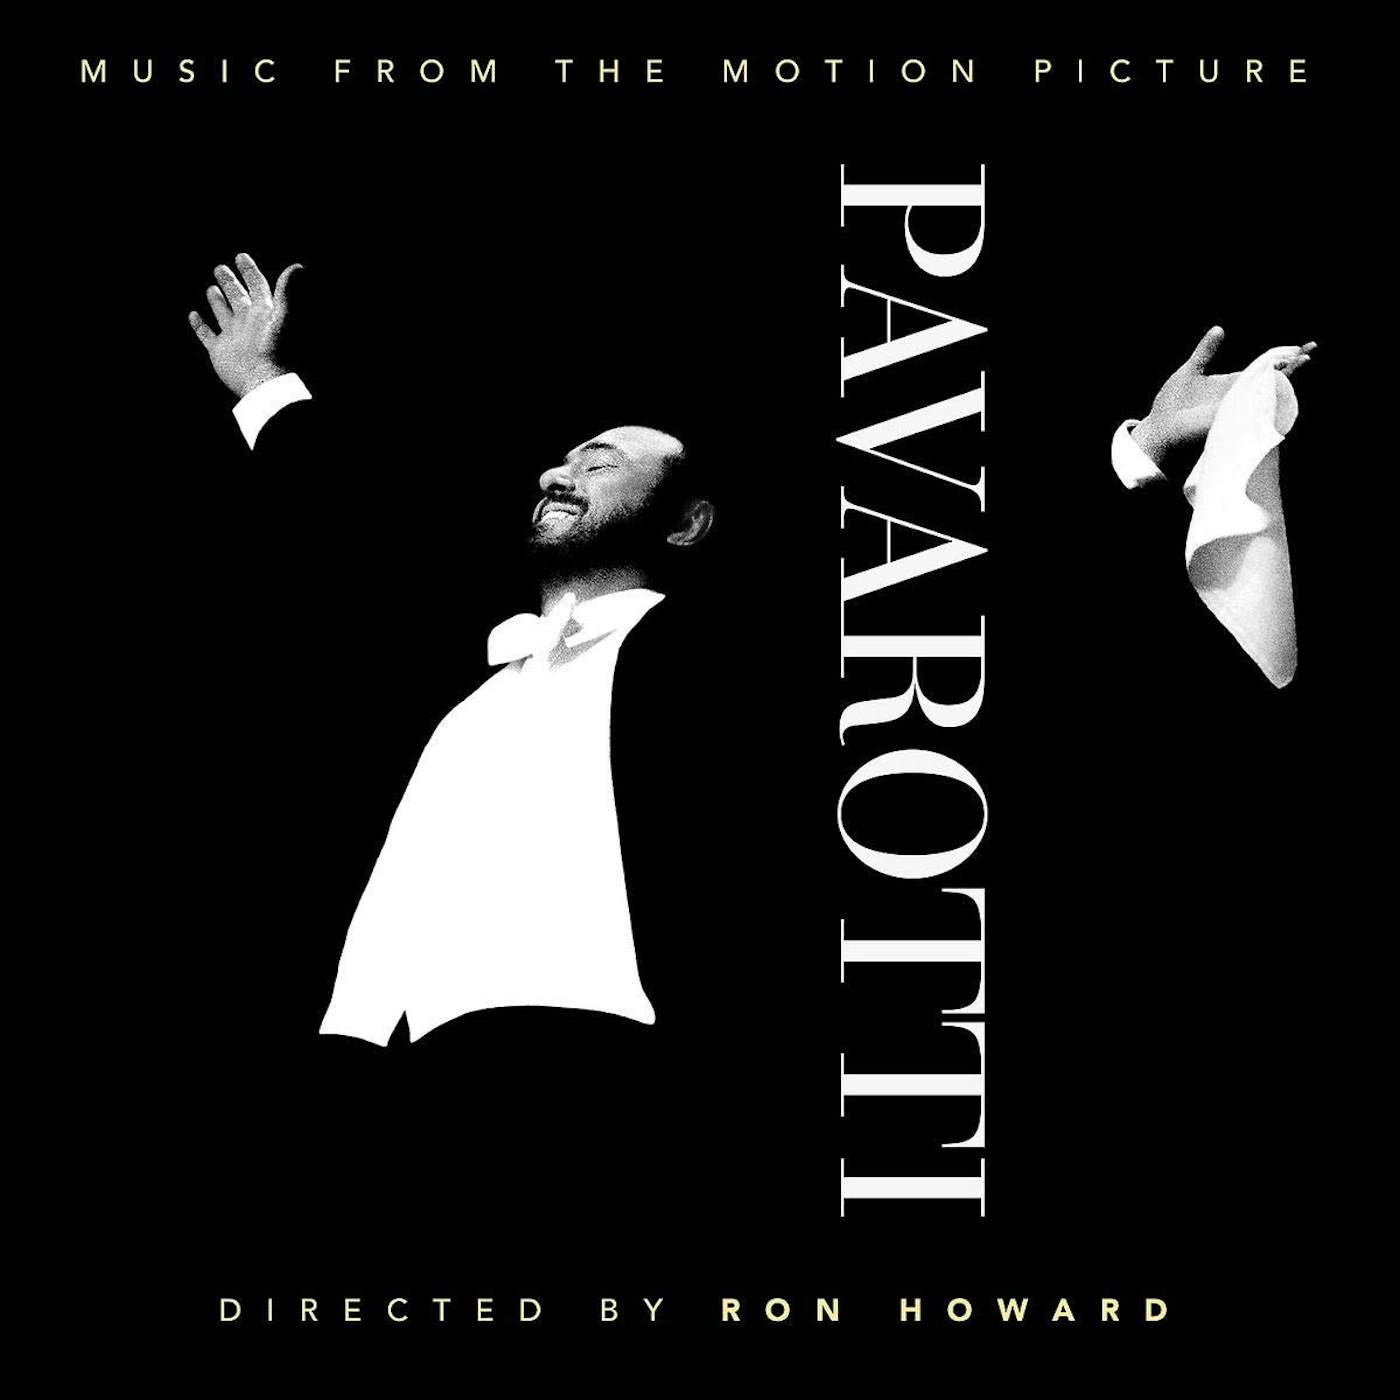 Luciano Pavarotti (MUSIC FROM THE MOTION PICTURE) CD